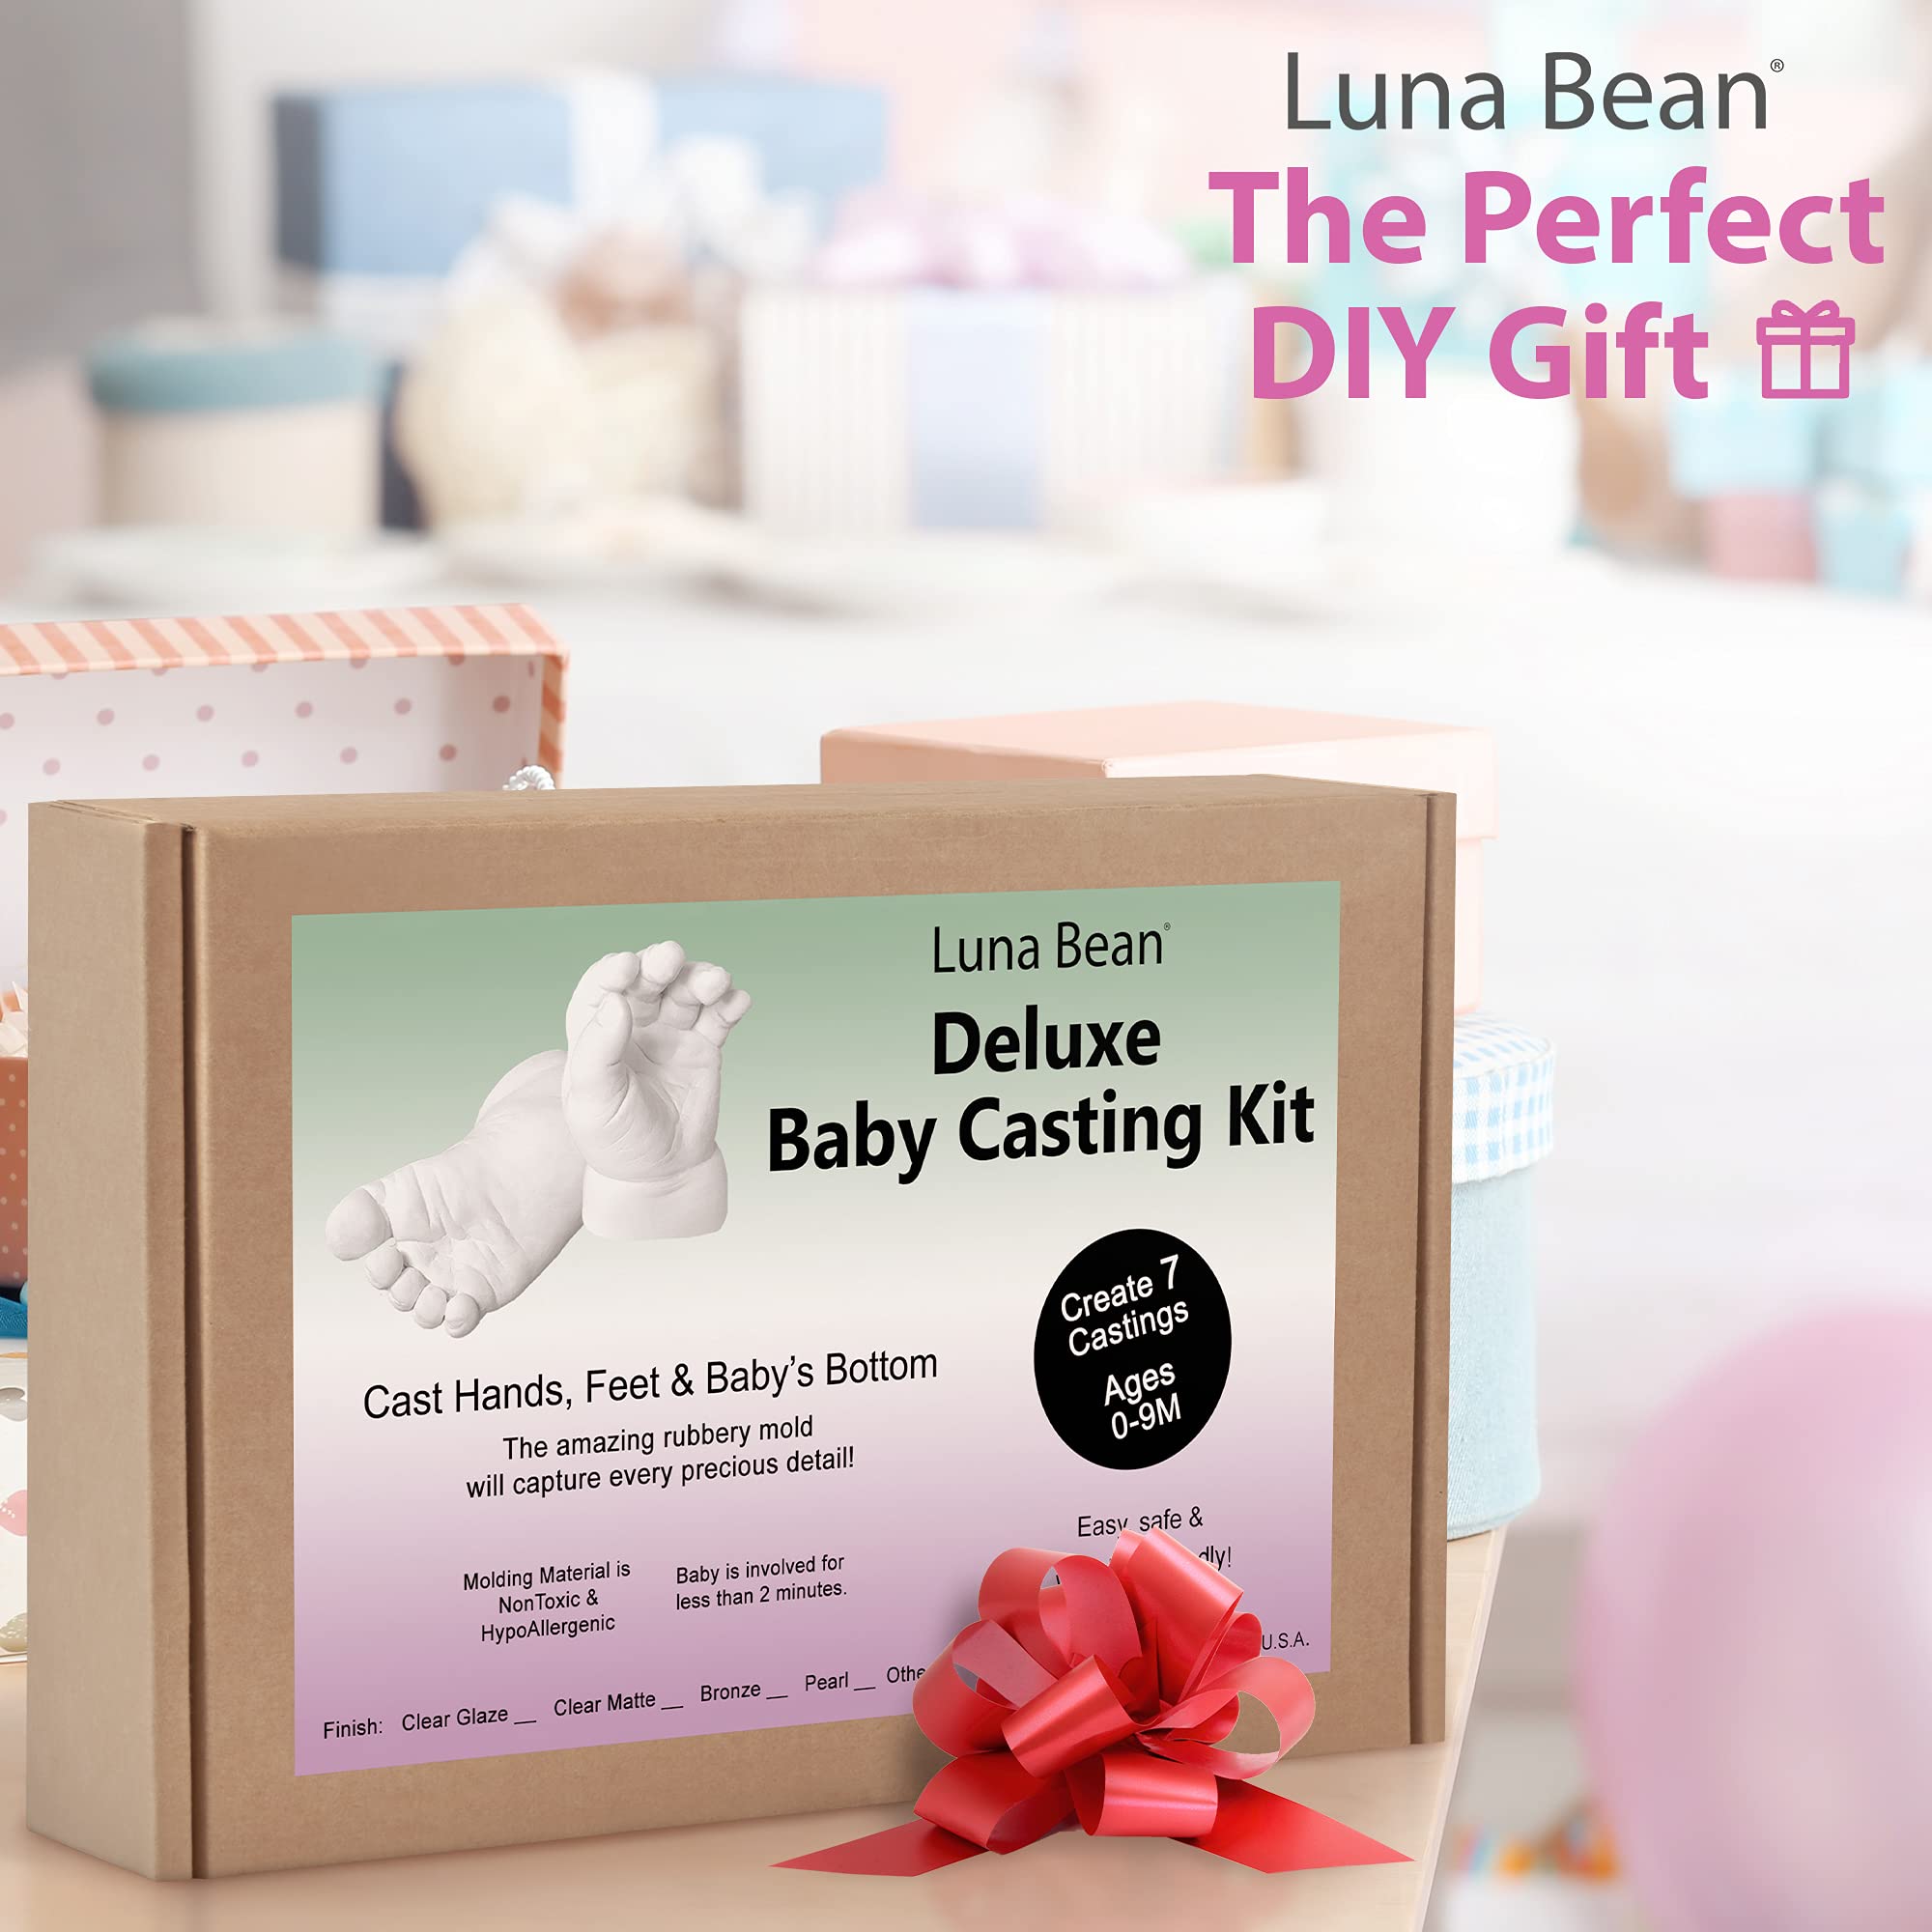 Luna Bean Hand Casting Kit - Hand Mold Kit Couples Gifts - Christmas Gifts  for Women, Mom - Gifts for Her, Him - Unique Anniversary & Bridal Shower  Gifts, Wedding, Engagement, Grandma Gifts